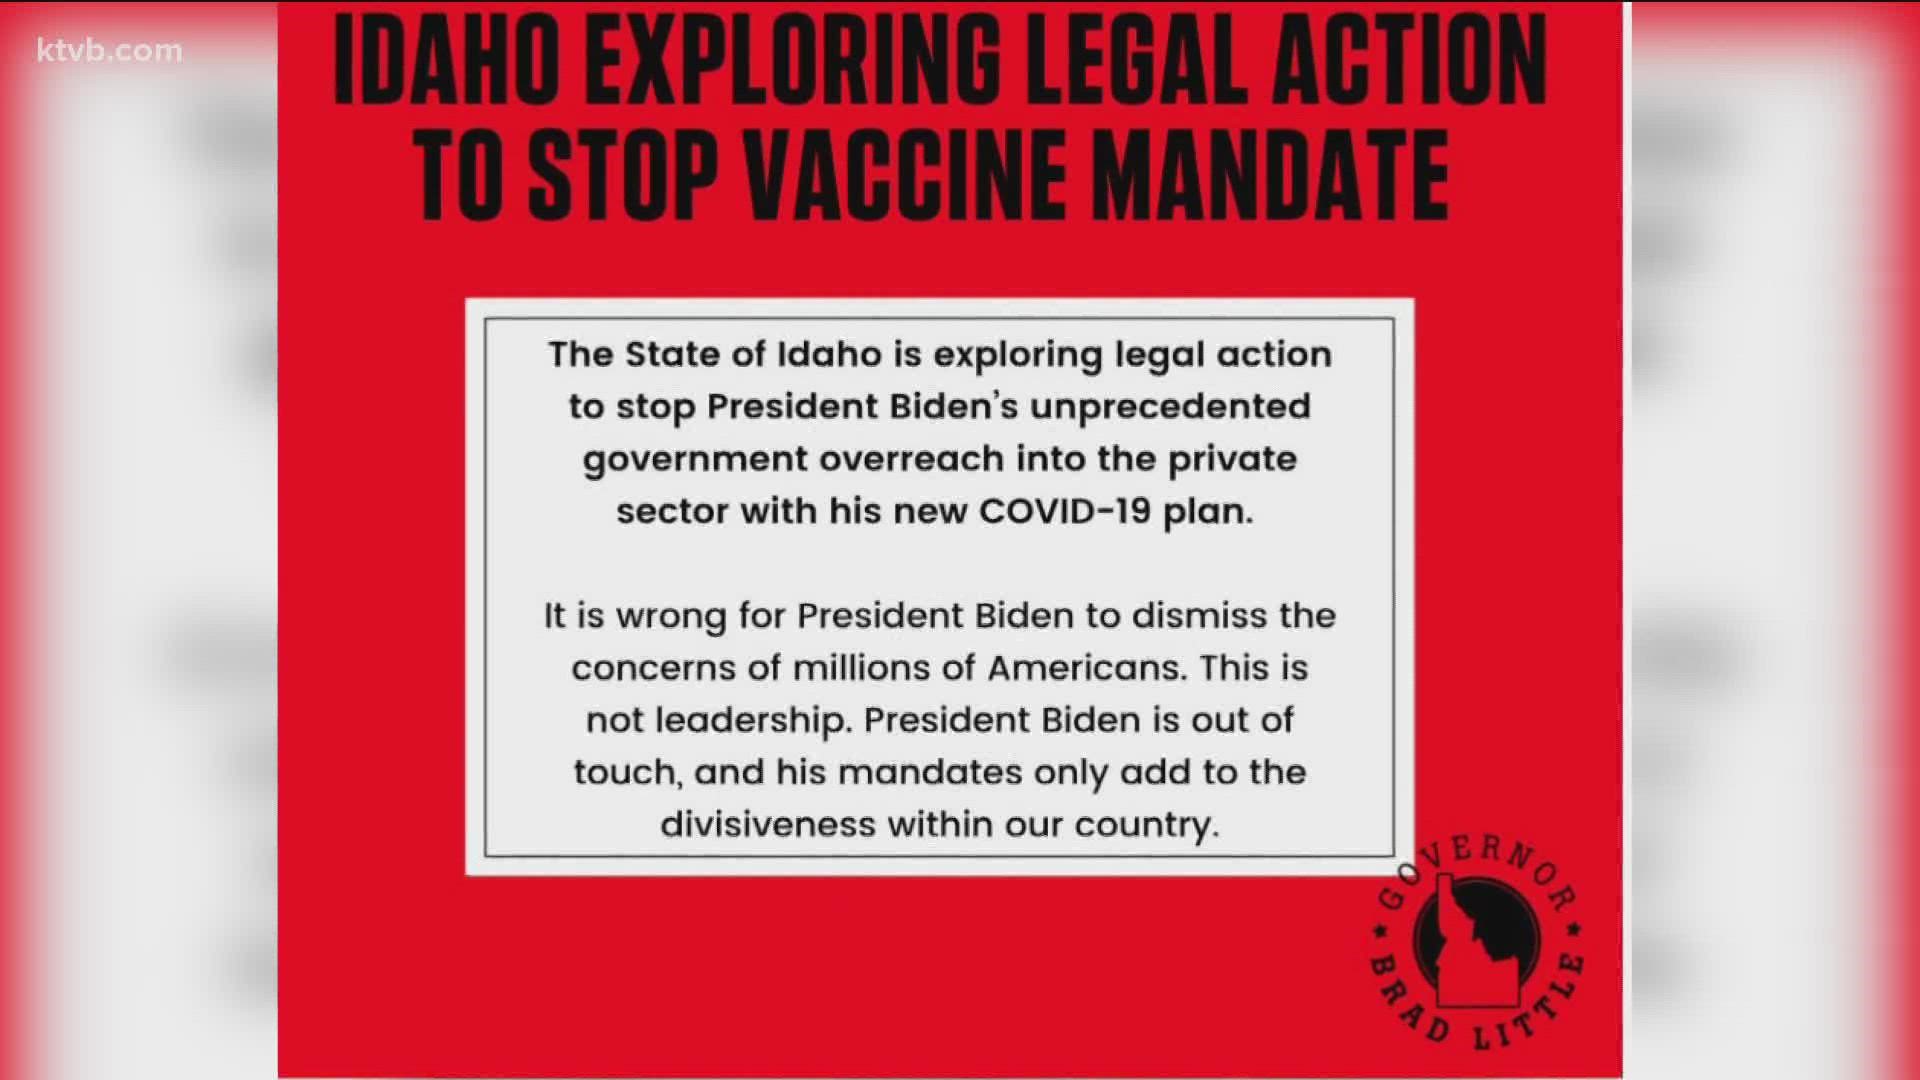 Since there is no general consensus on the president's vaccine requirements, it will likely end up in federal court.